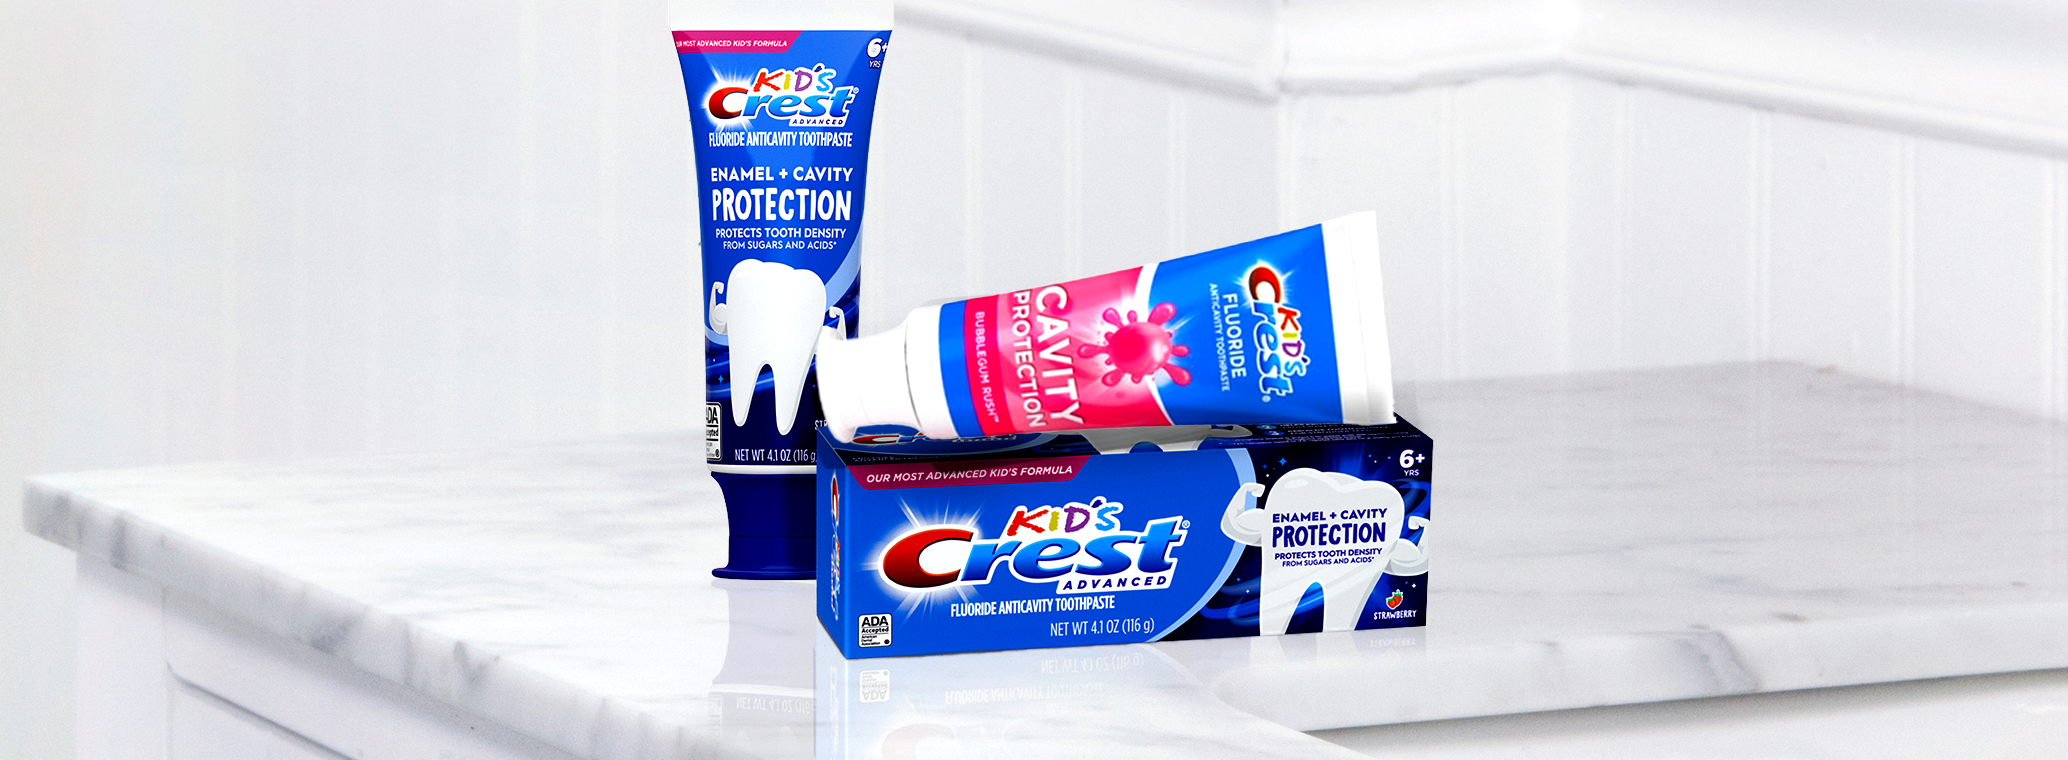 Which Crest Toothpastes Are Non-Mint Flavored?